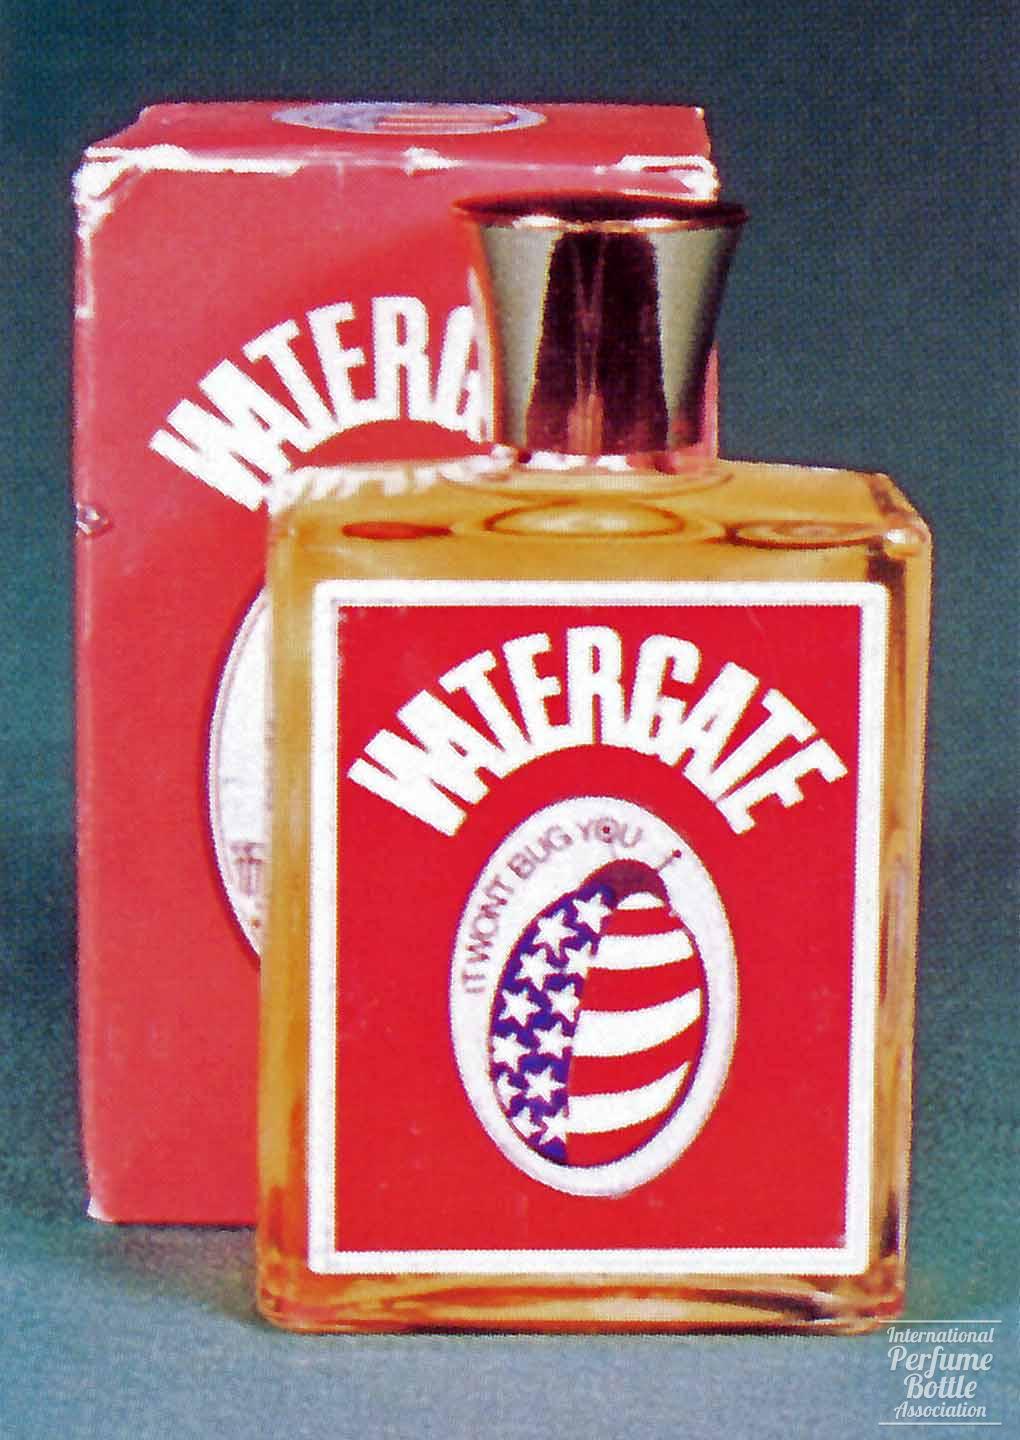 "Watergate Cologne for Men" by Watergate Toiletries